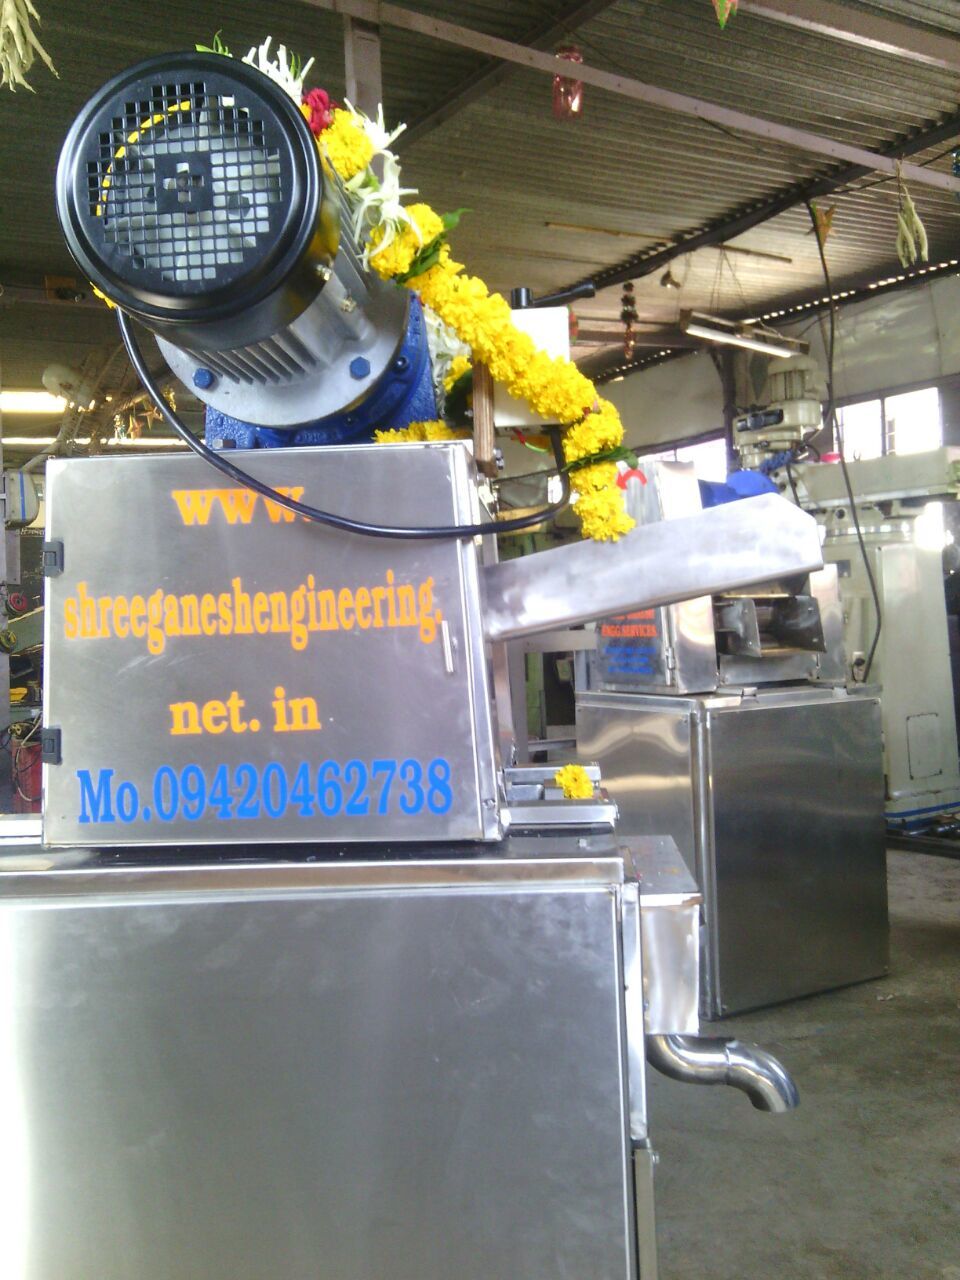 Stainless steel sugar cane crusher